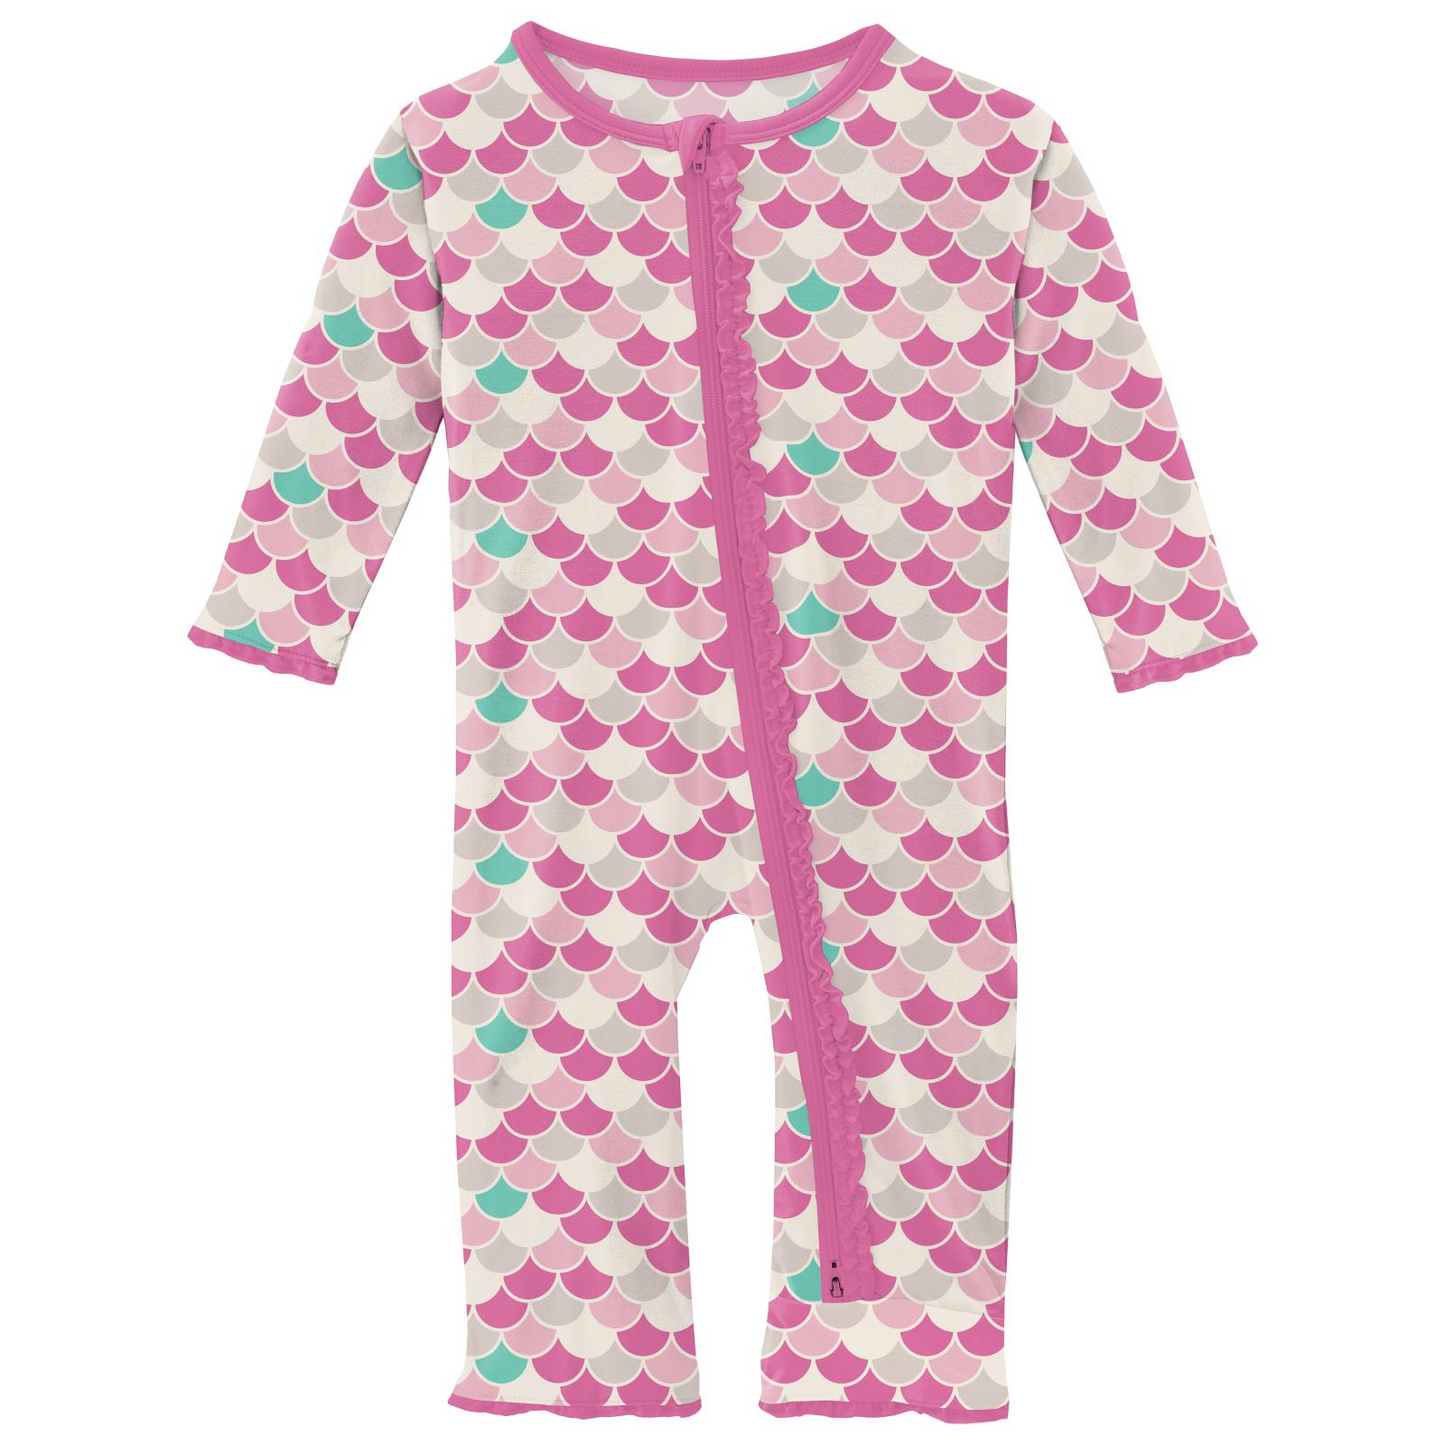 Bamboo Print Muffin Ruffle Coverall with 2 Way Zipper: Tulip Scales